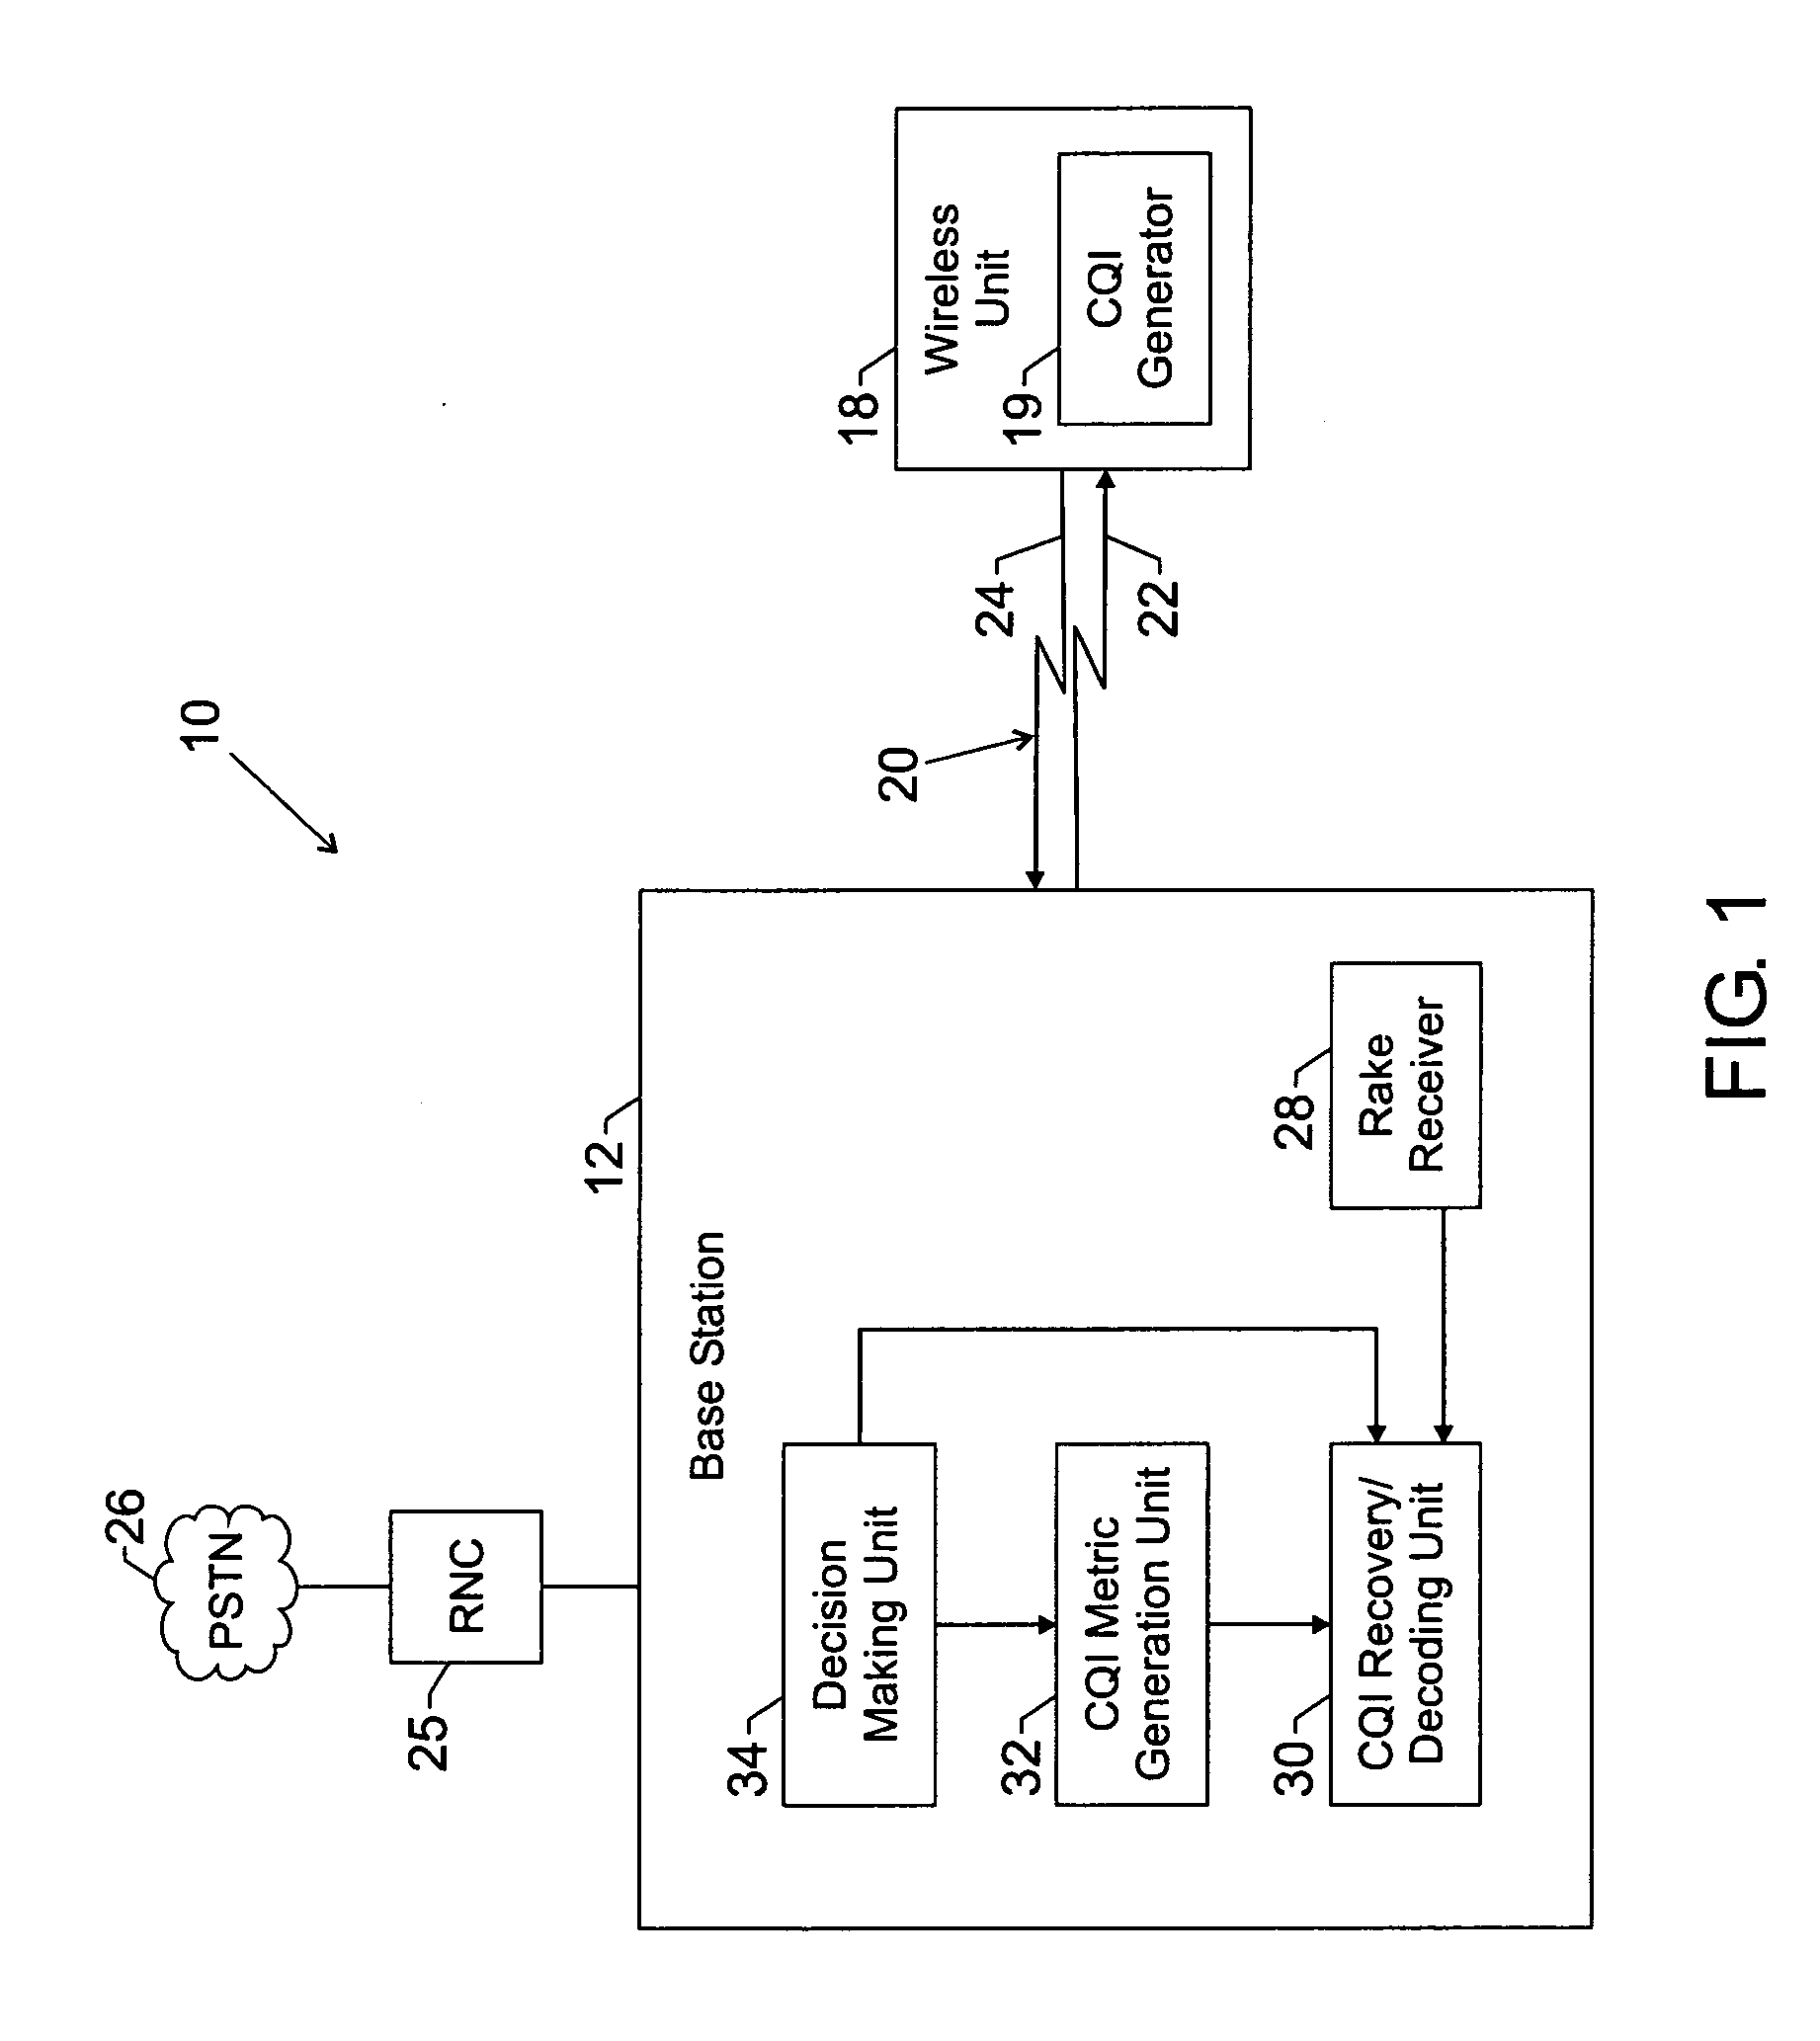 Utilization of overhead channel quality metrics in a cellular network